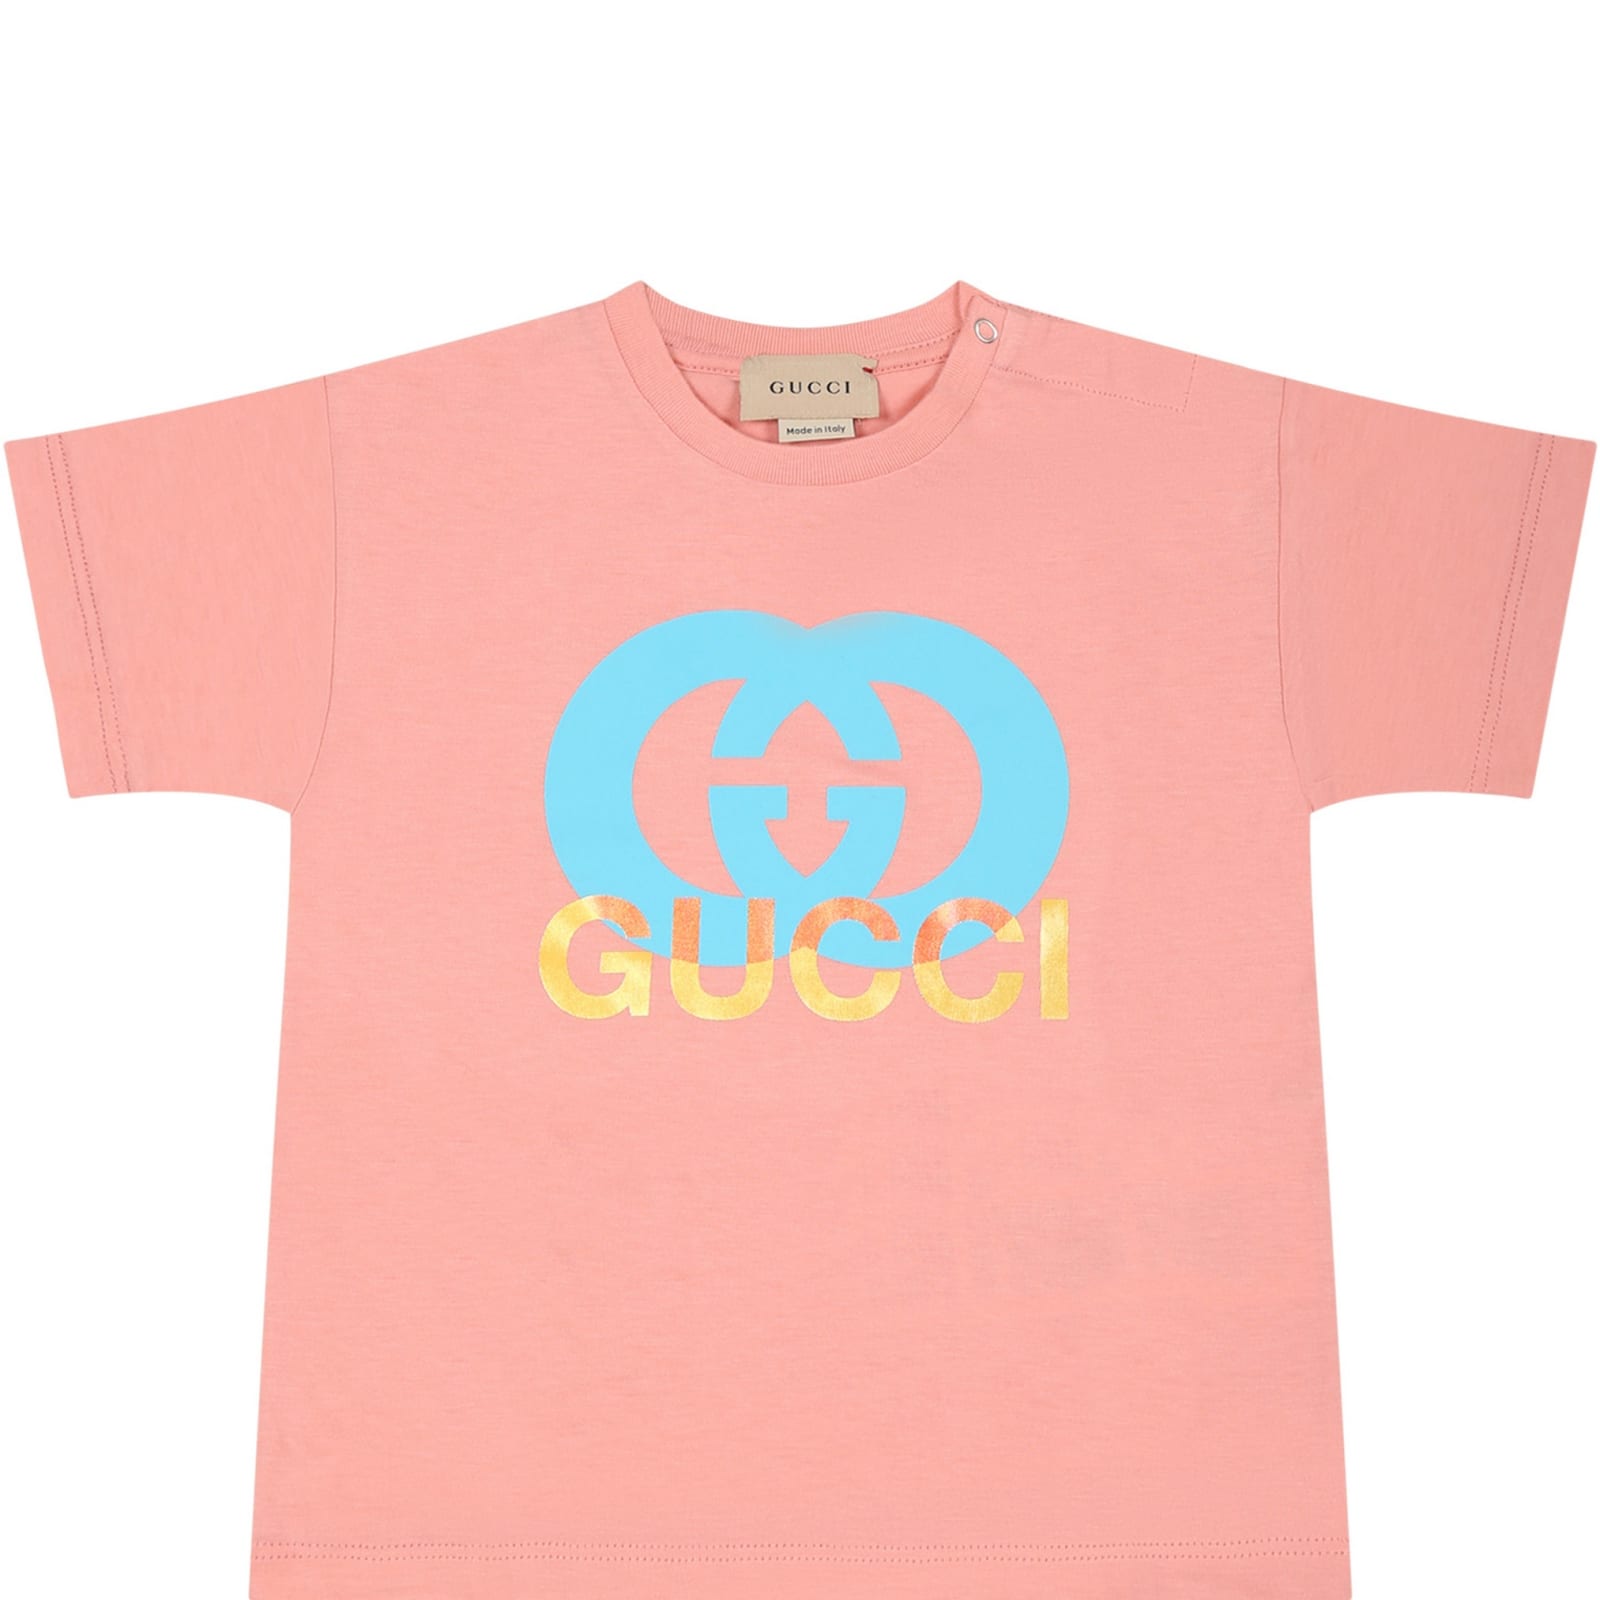 GUCCI PINK T-SHIRT FOR BABY GIRL WITH INTERLOCKING GG